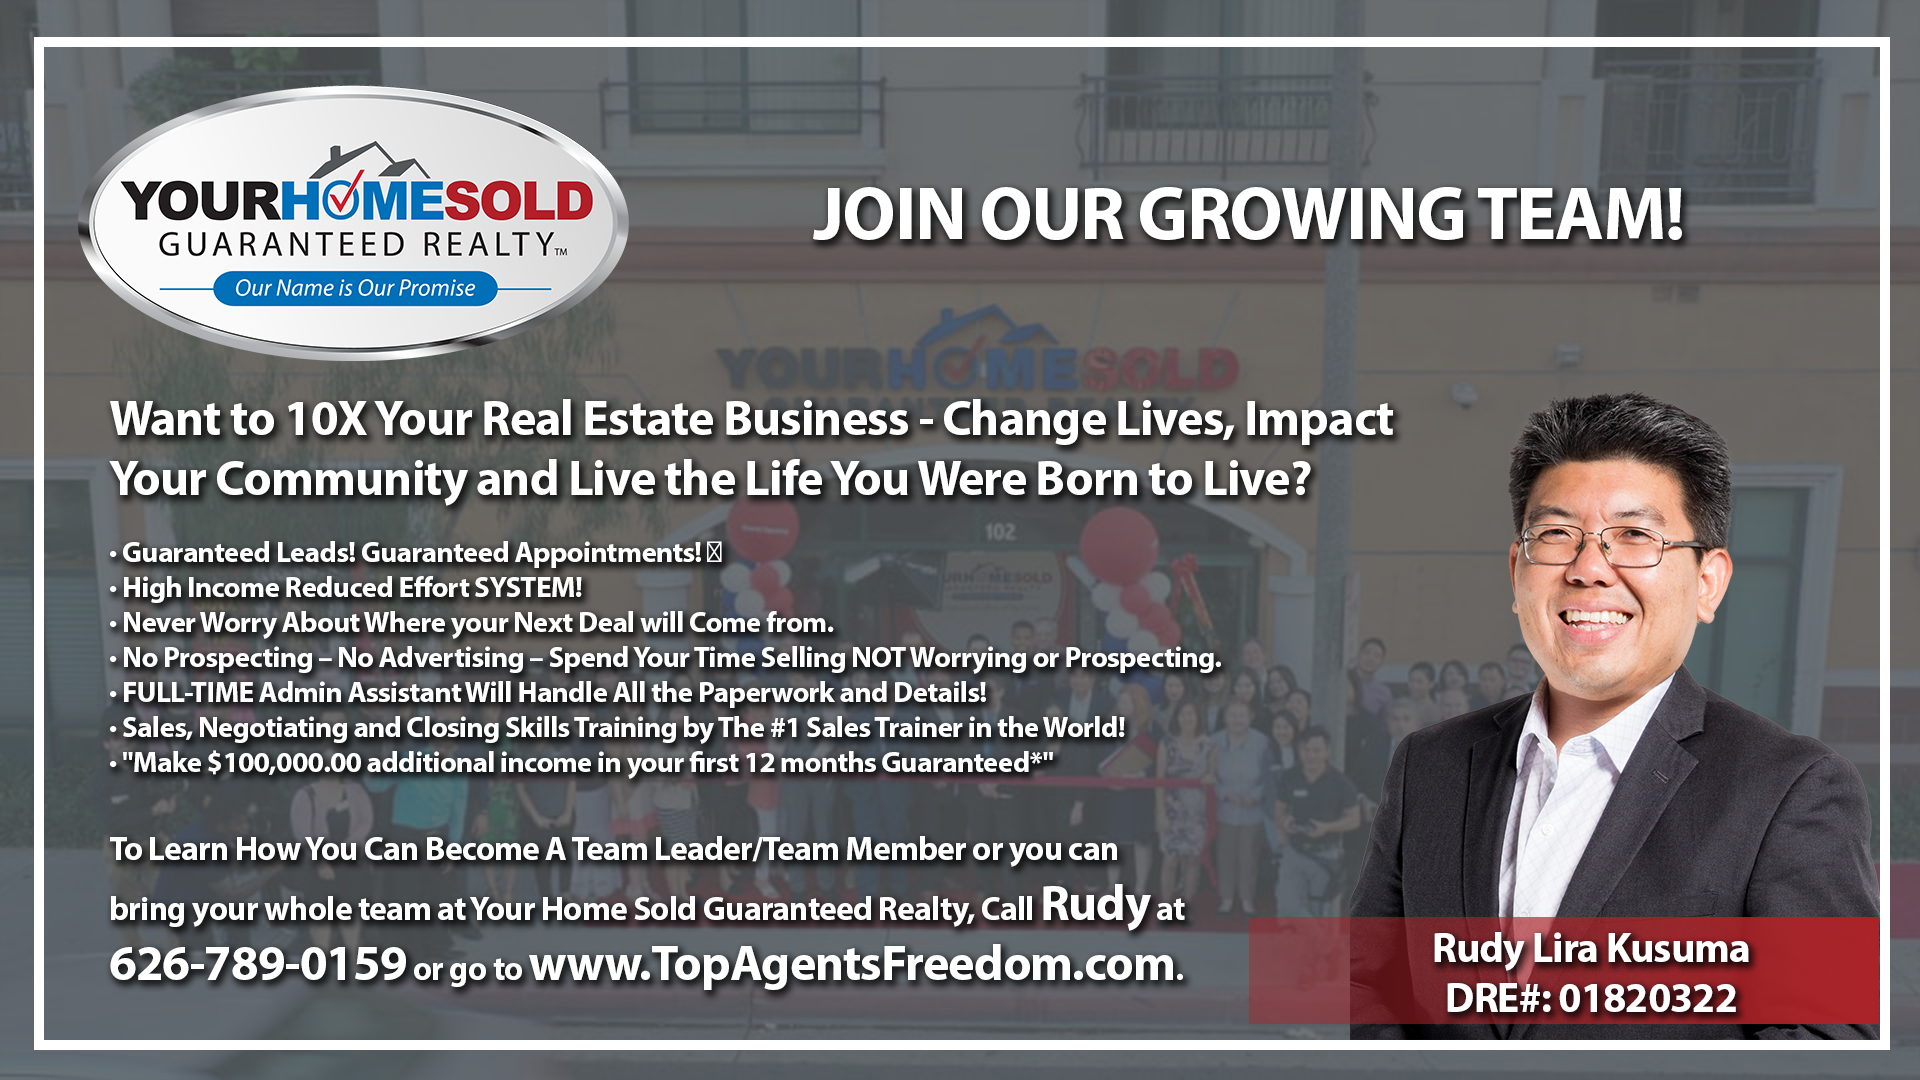 Want to 10X Your Real Estate Business - Change Lives, Impact Your Community and Live the Life You Were Born to Live?